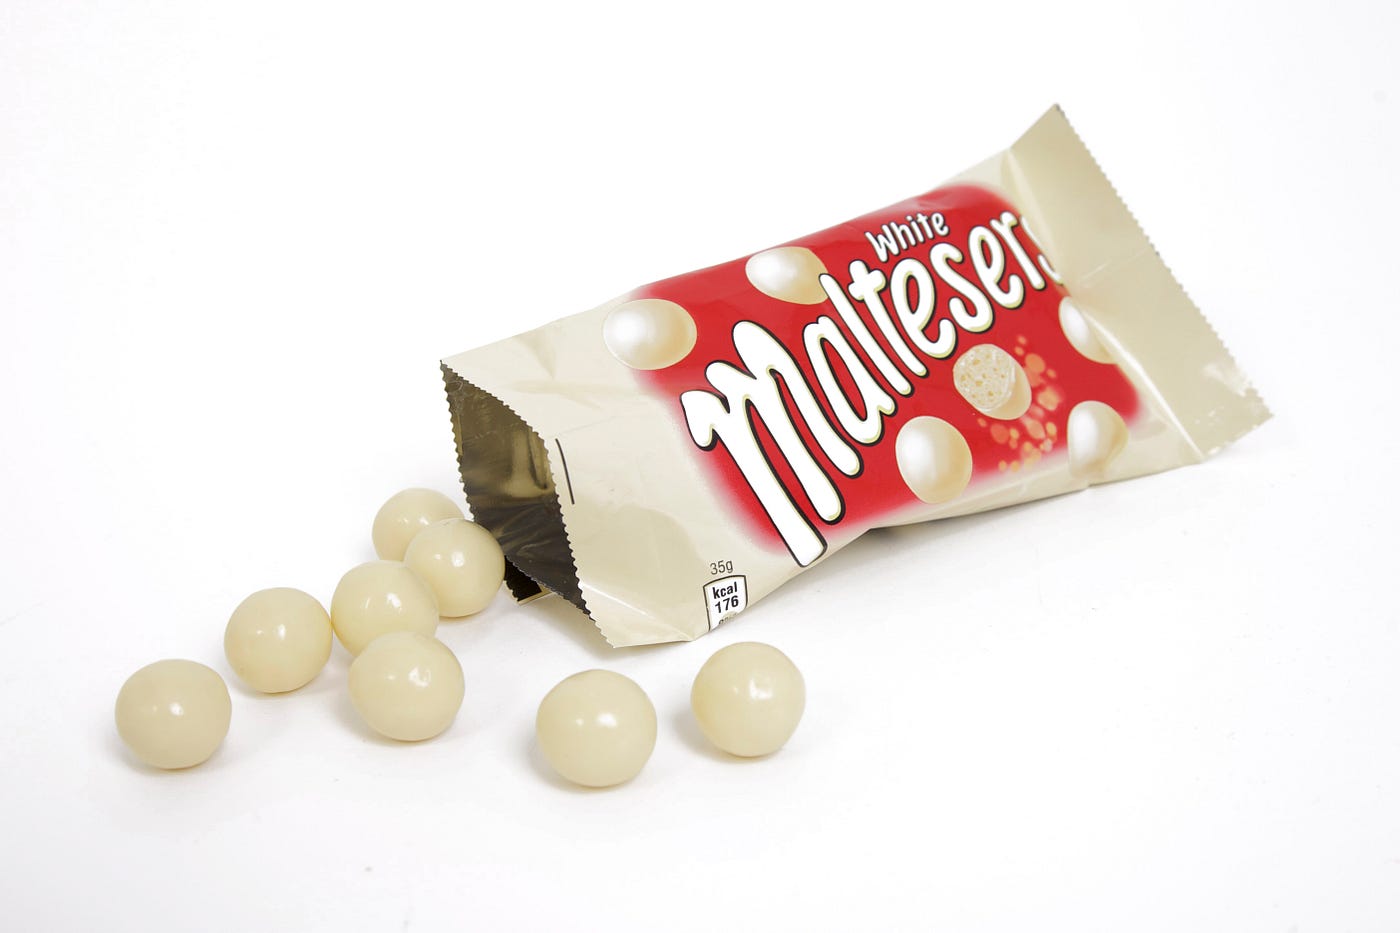 What Ever Happend To White Chocolate Malteasers? | by Shola Osiyemi | Medium